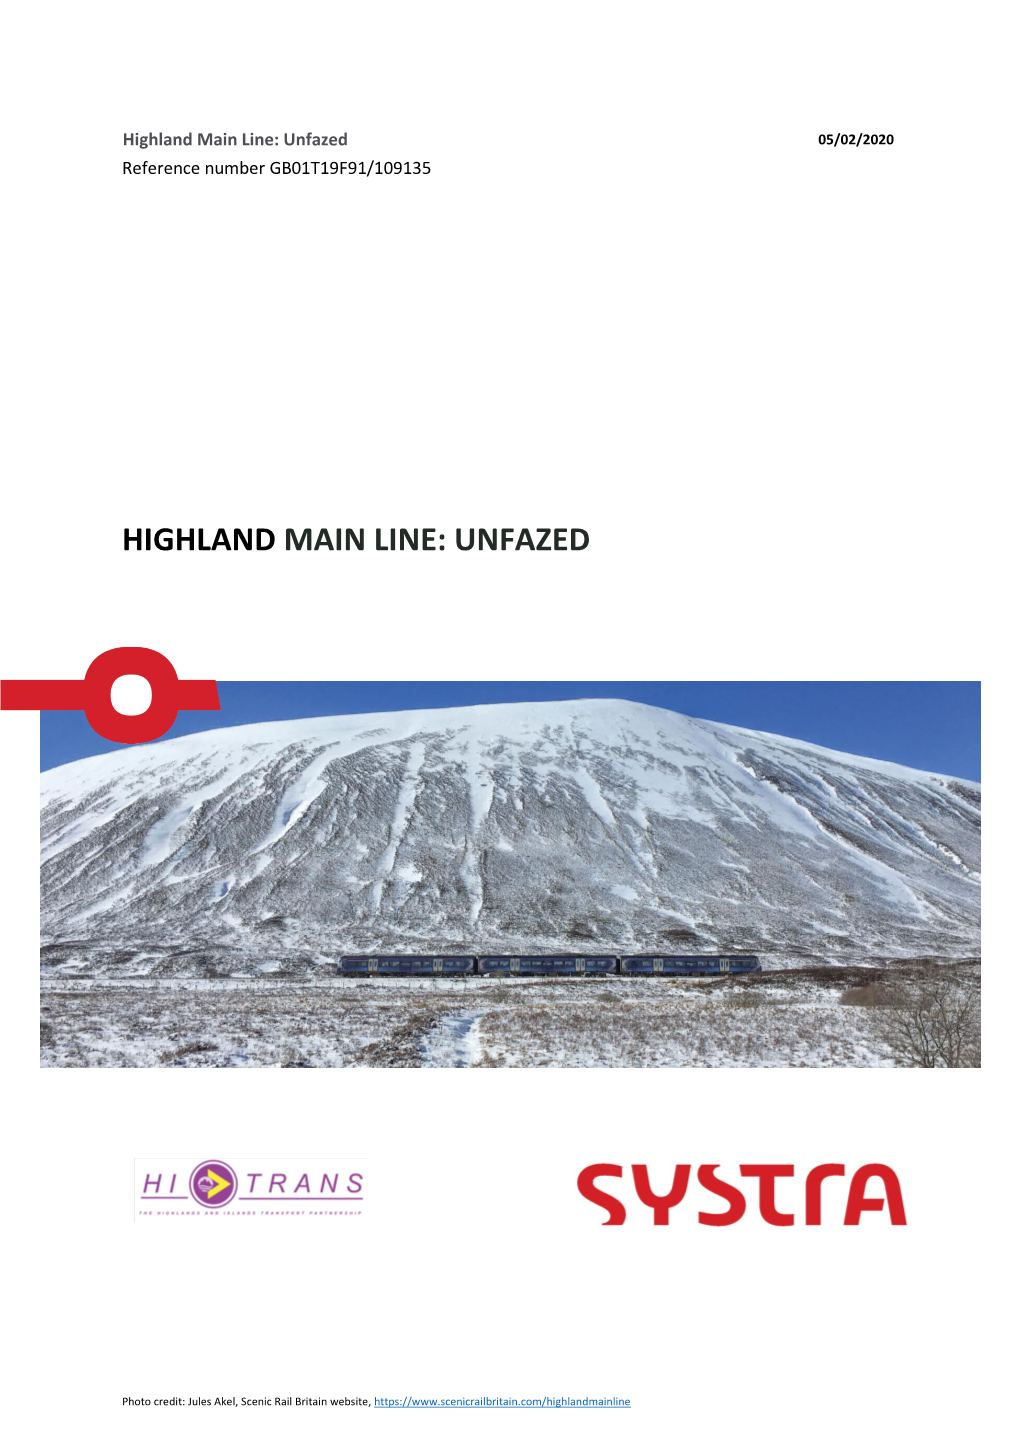 Highland Main Line: Unfazed 05/02/2020 Reference Number GB01T19F91/109135